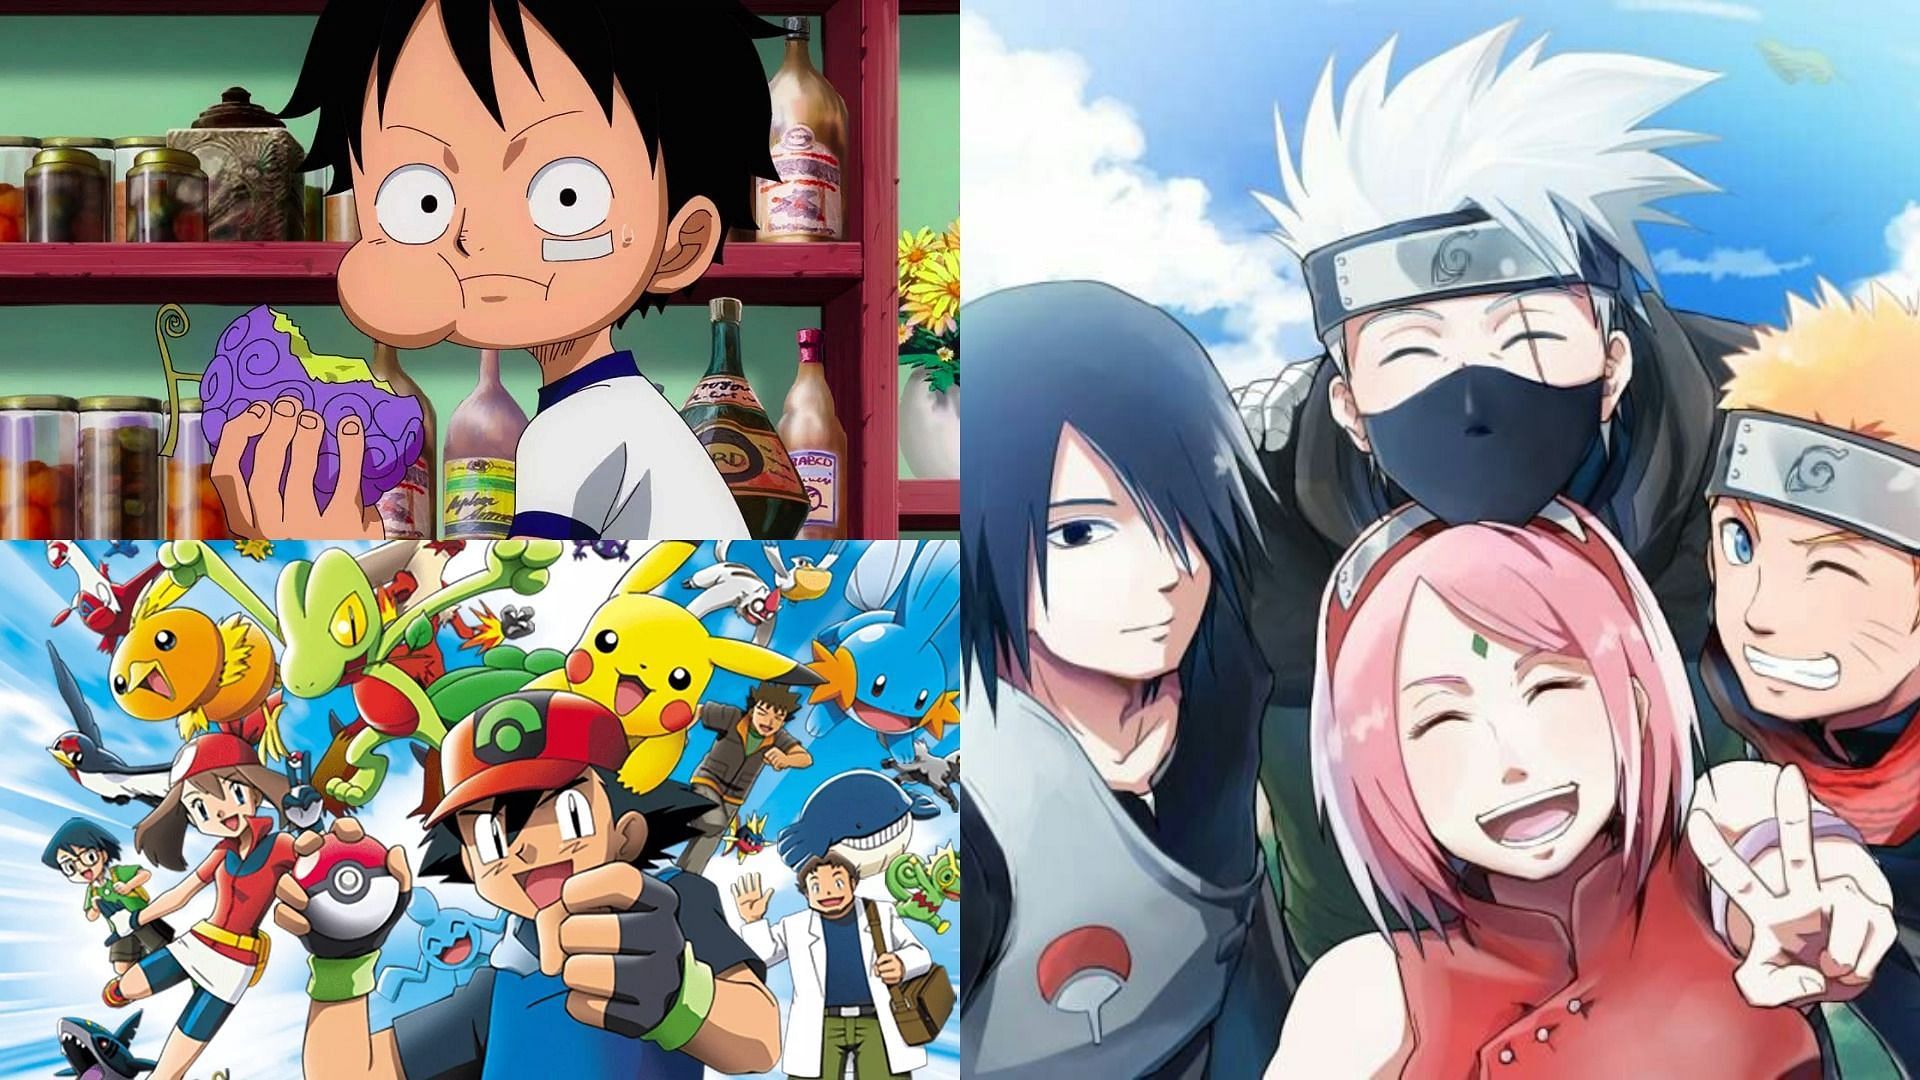 10 Most Overrated Manga Protagonists, According To Reddit